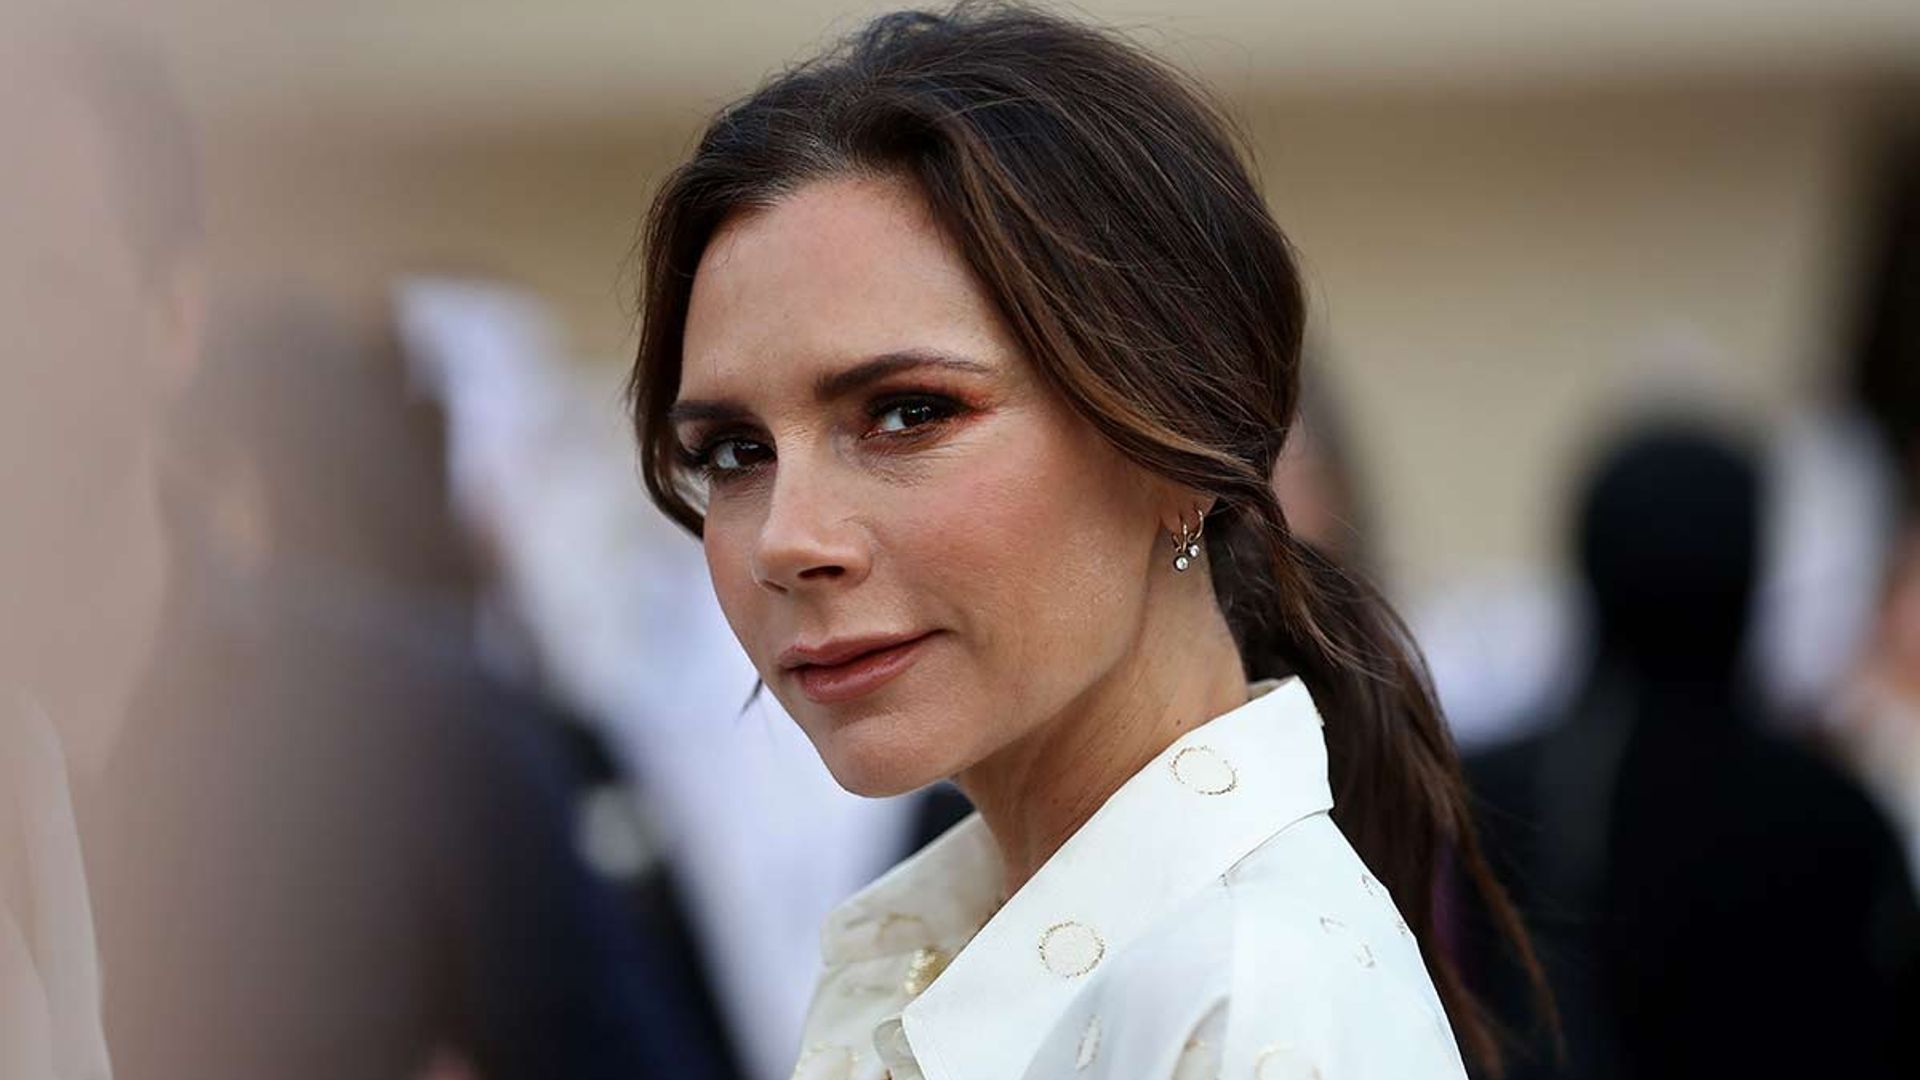 Victoria Beckham shares emotional tribute to late friend: 'He is so missed'